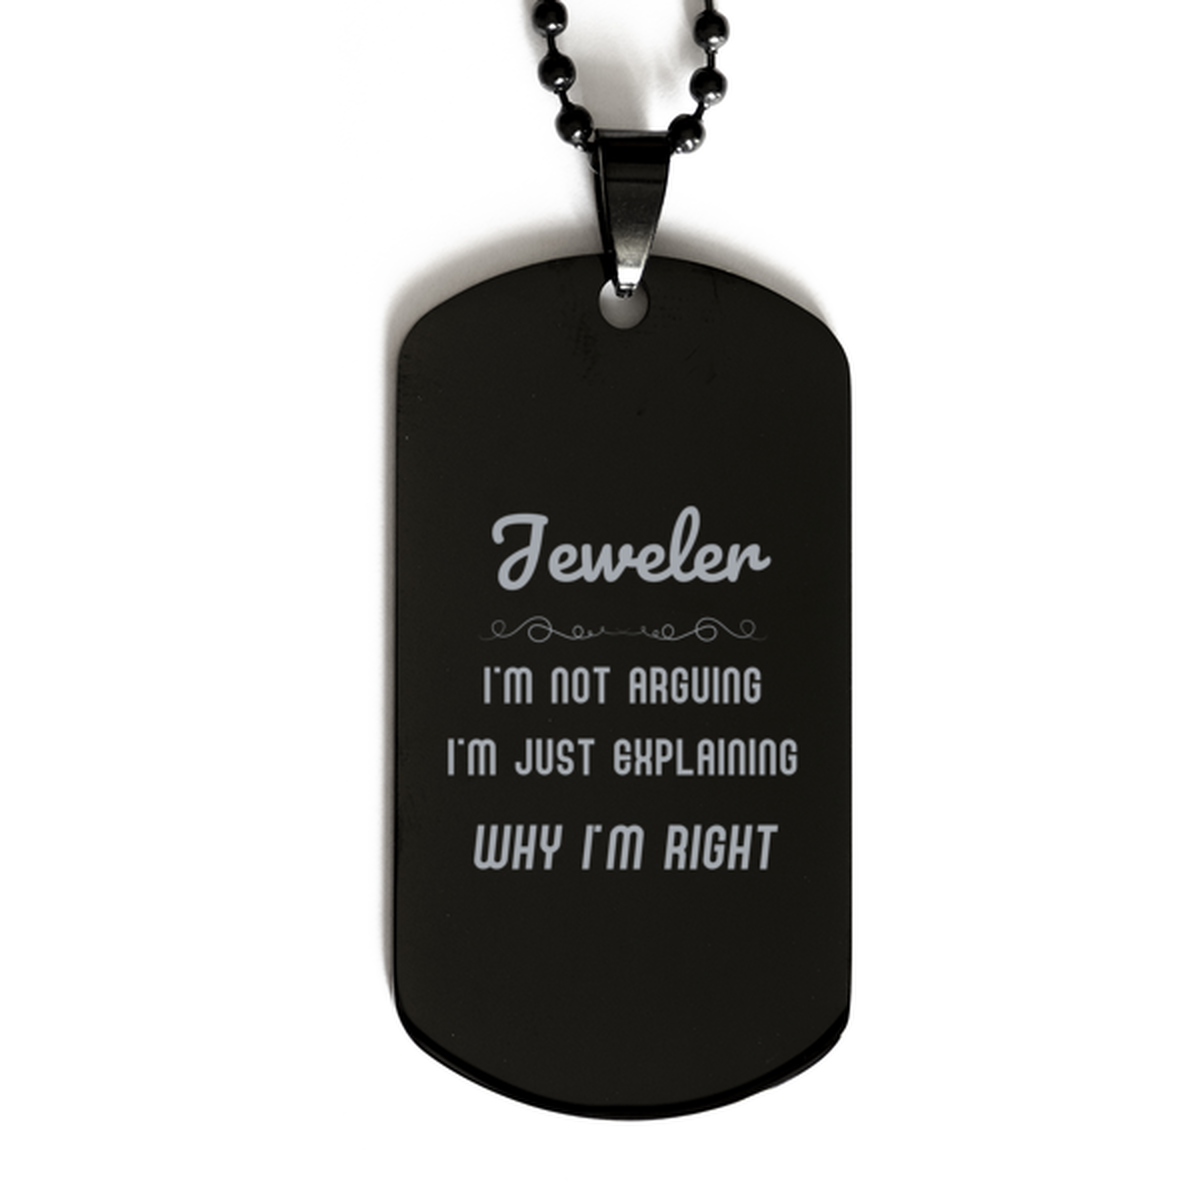 Jeweler I'm not Arguing. I'm Just Explaining Why I'm RIGHT Black Dog Tag, Funny Saying Quote Jeweler Gifts For Jeweler Graduation Birthday Christmas Gifts for Men Women Coworker